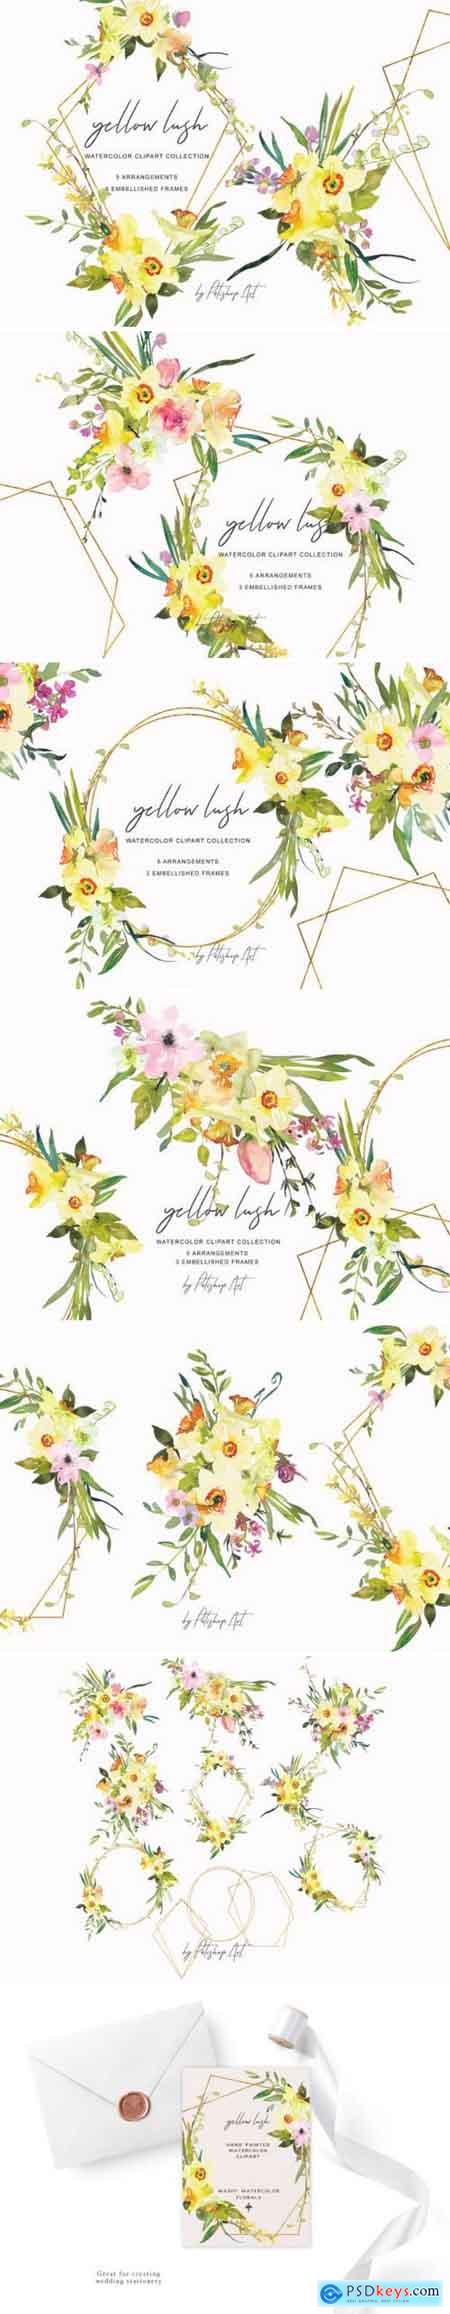 Watercolor Daffodil Bouquets and Frames